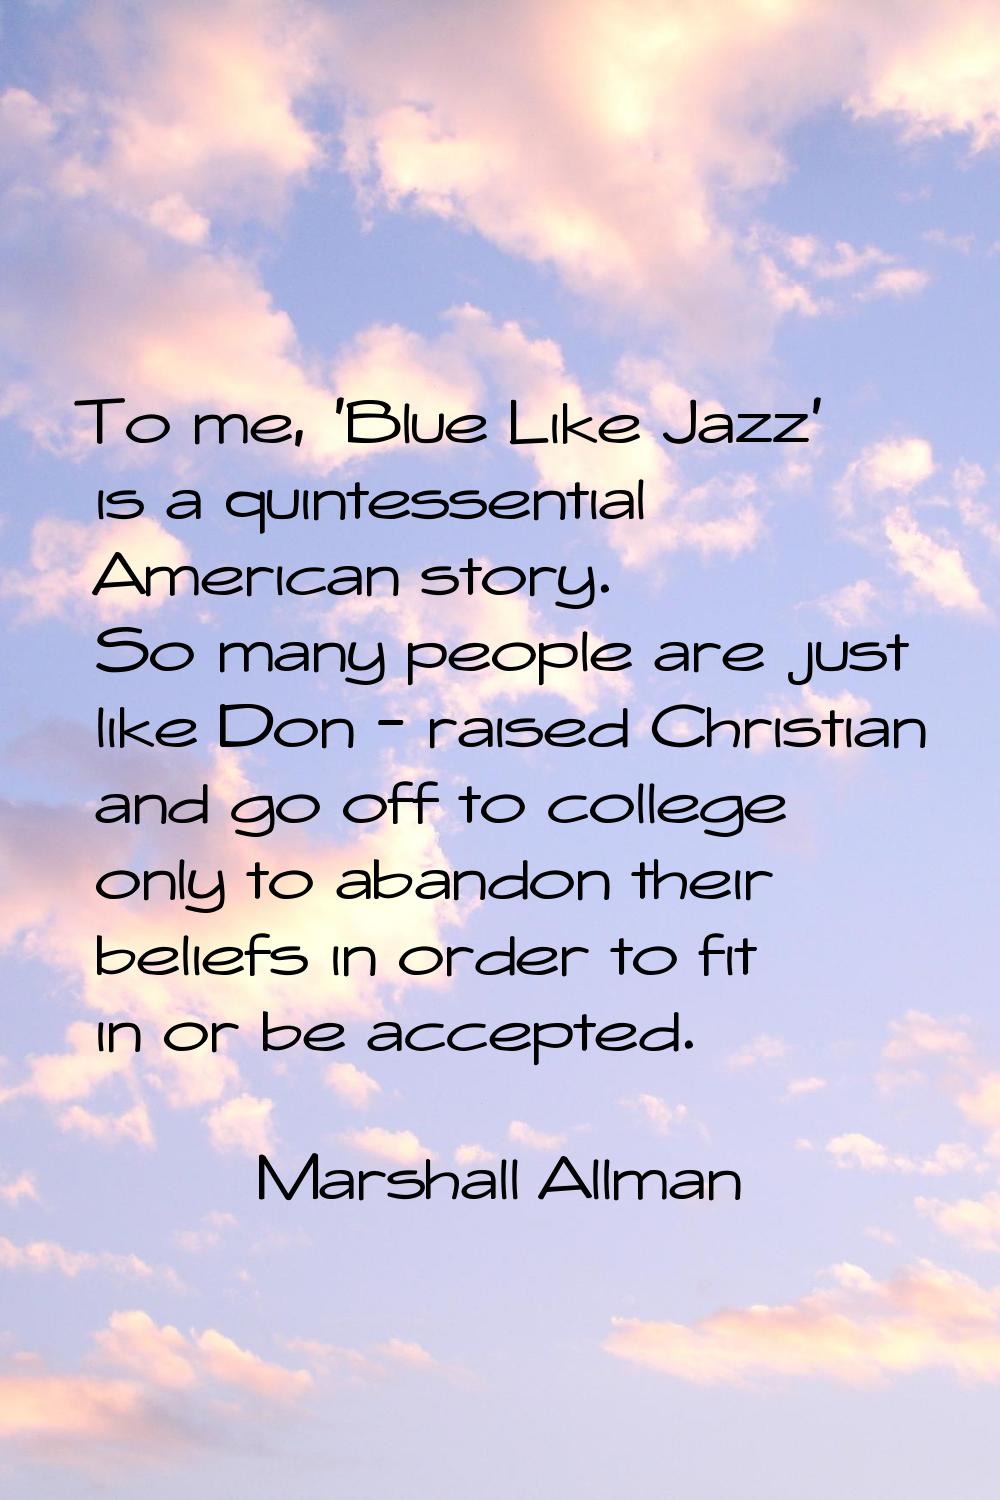 To me, 'Blue Like Jazz' is a quintessential American story. So many people are just like Don - rais